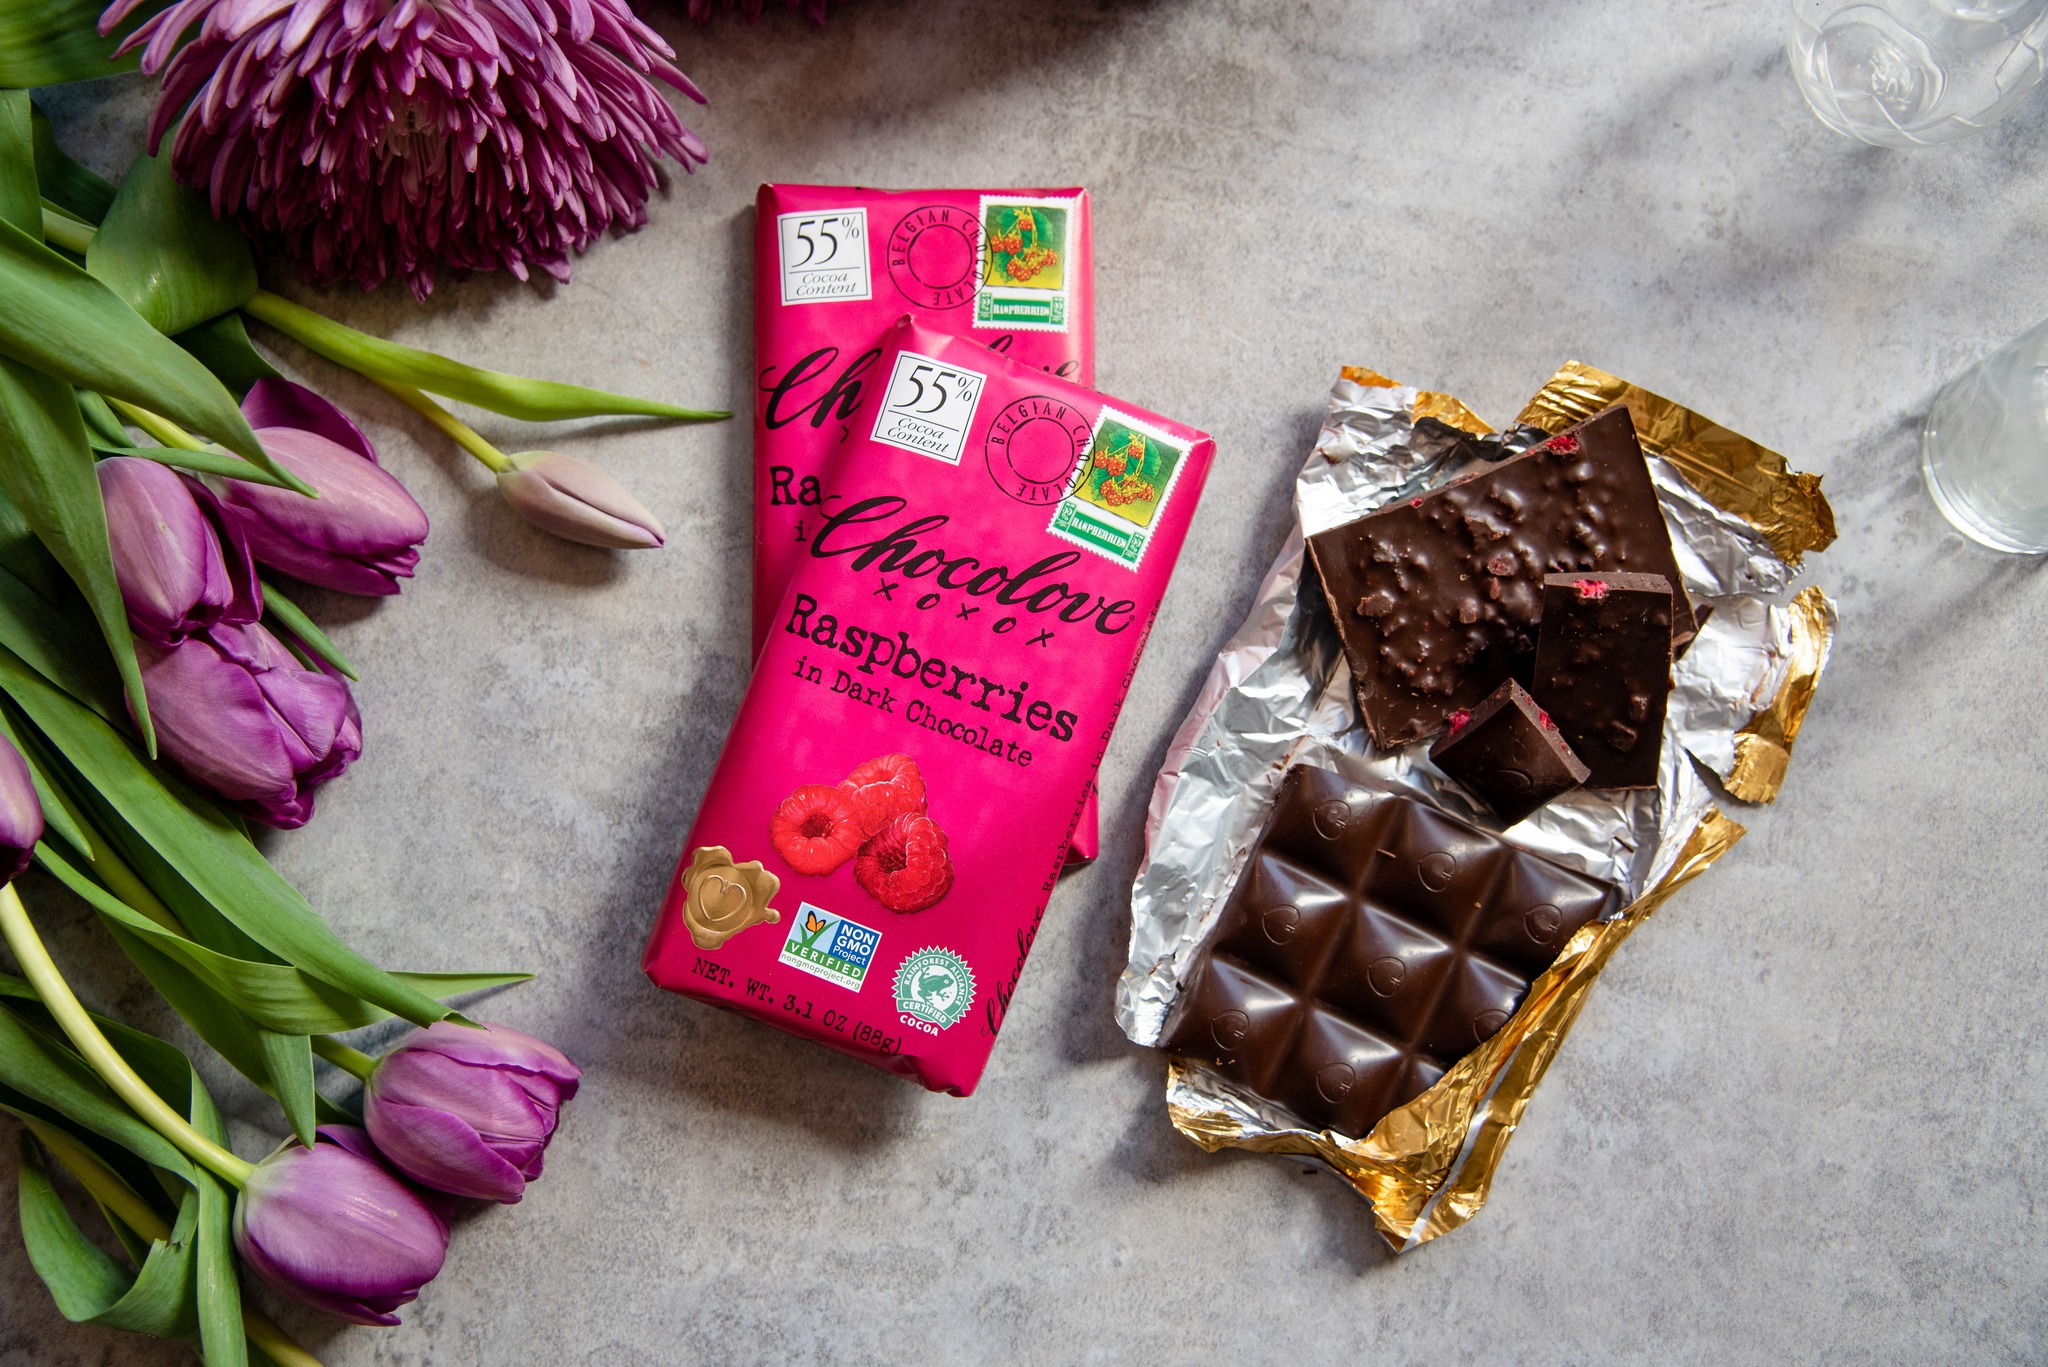 Chocolove Raspberry in Dark Chocolate bars, one opened and still in its foil wrapper, arranged next to pink spring flowers on a grey marble surface